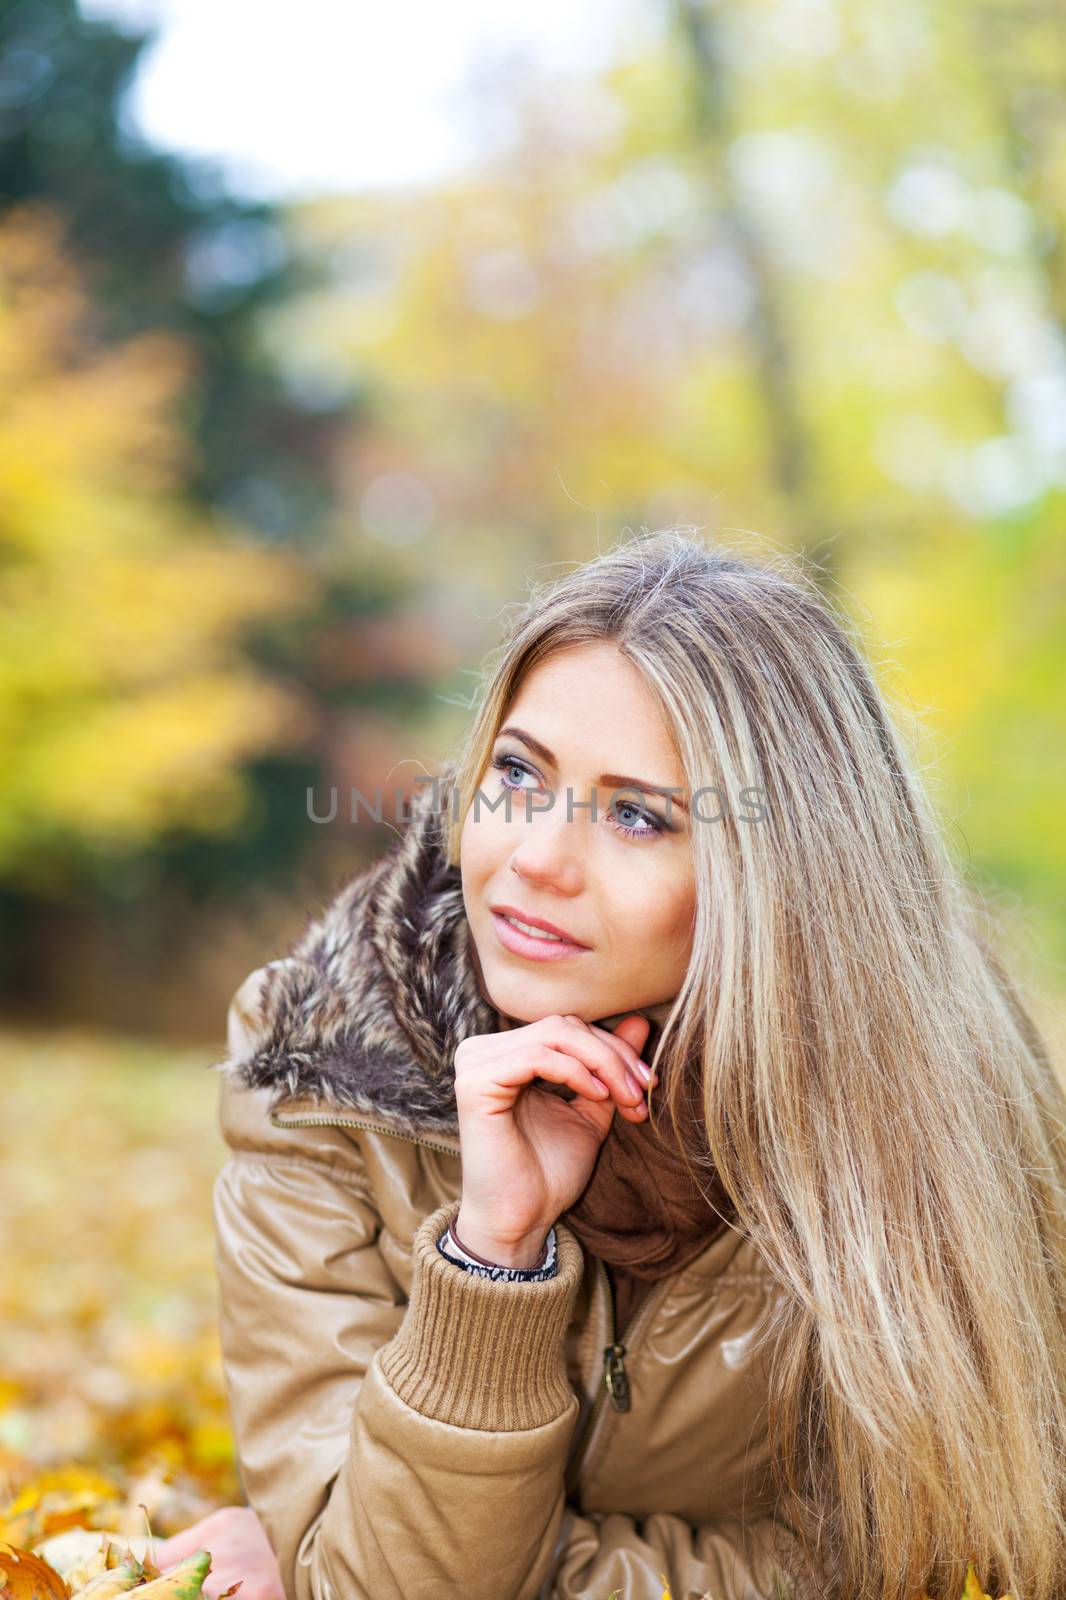 Nice woman in a park in autumn by TristanBM